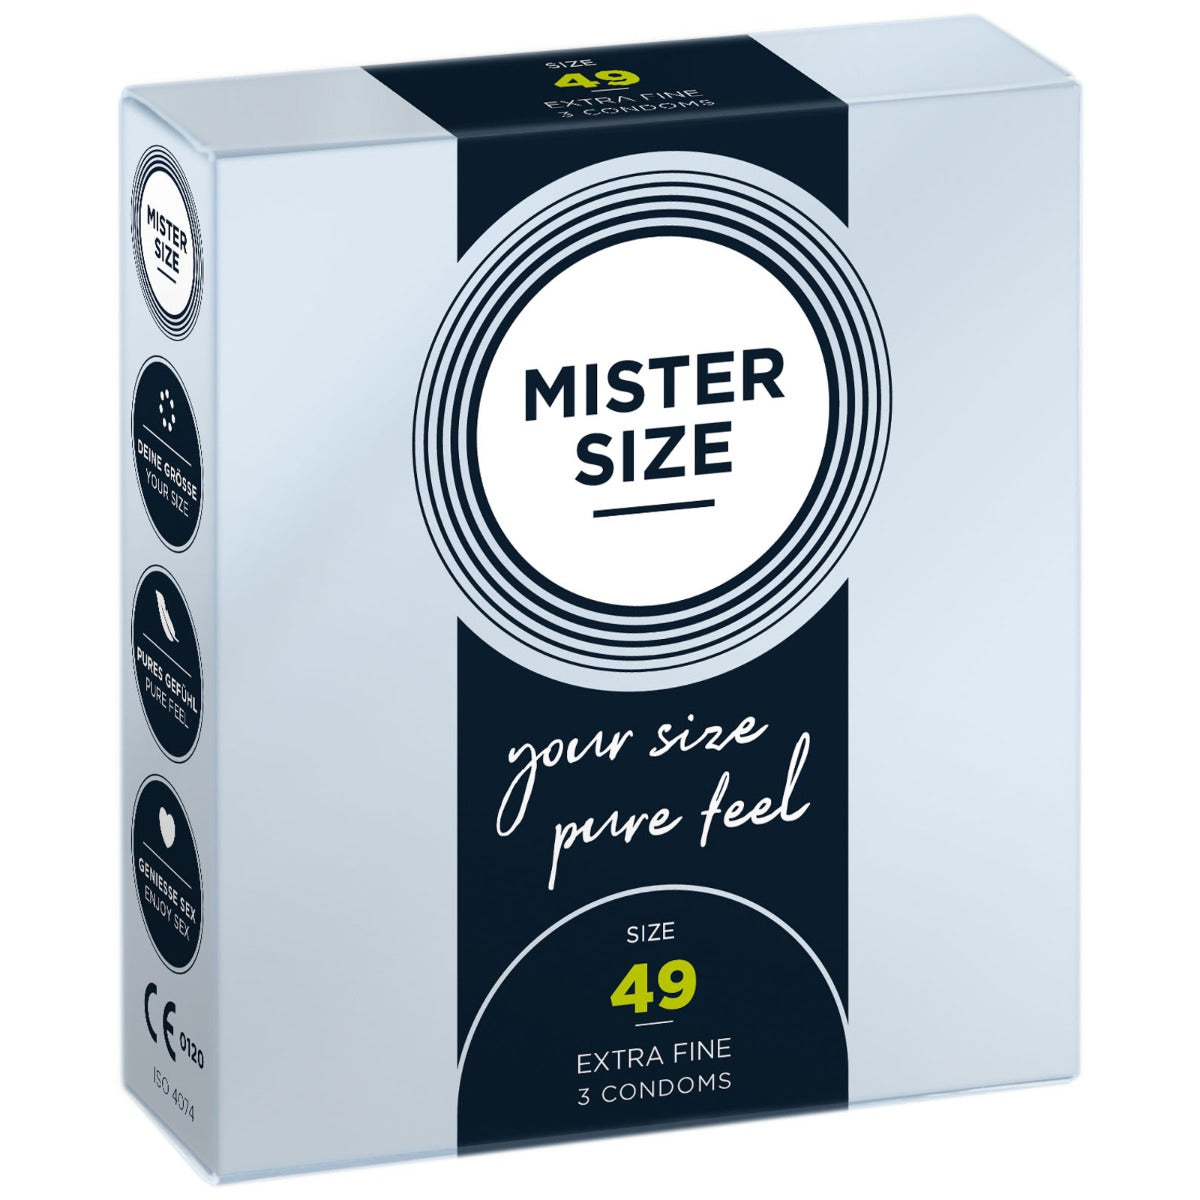 Mister Size Pure Feel Condoms Size 49mm 3 Pack